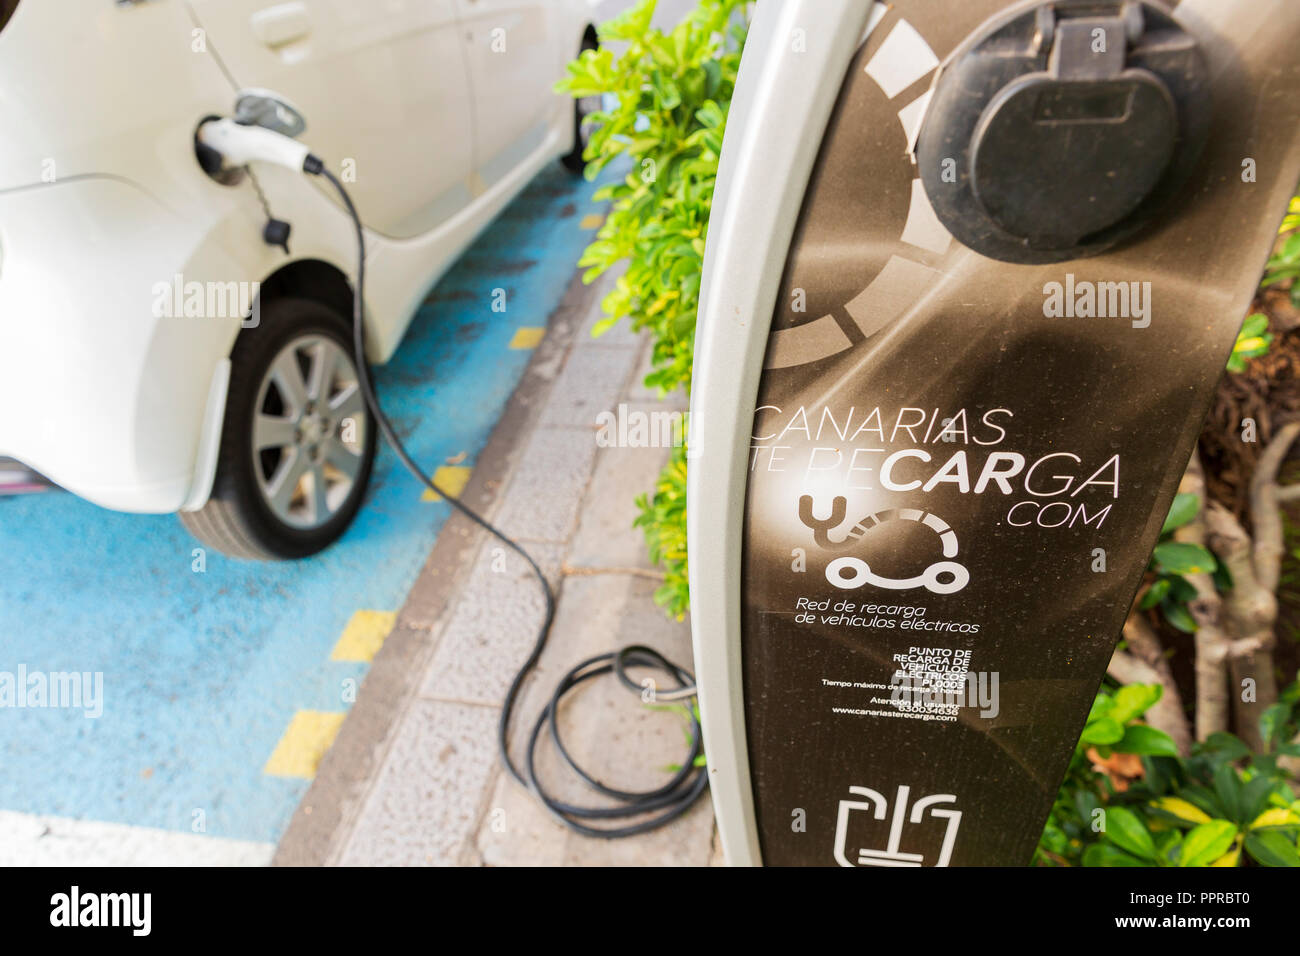 Peugeot Ion electric car plugged in at a public charging station on the street in Santa Cruz de La Palma, Canary Islands, Spain Stock Photo